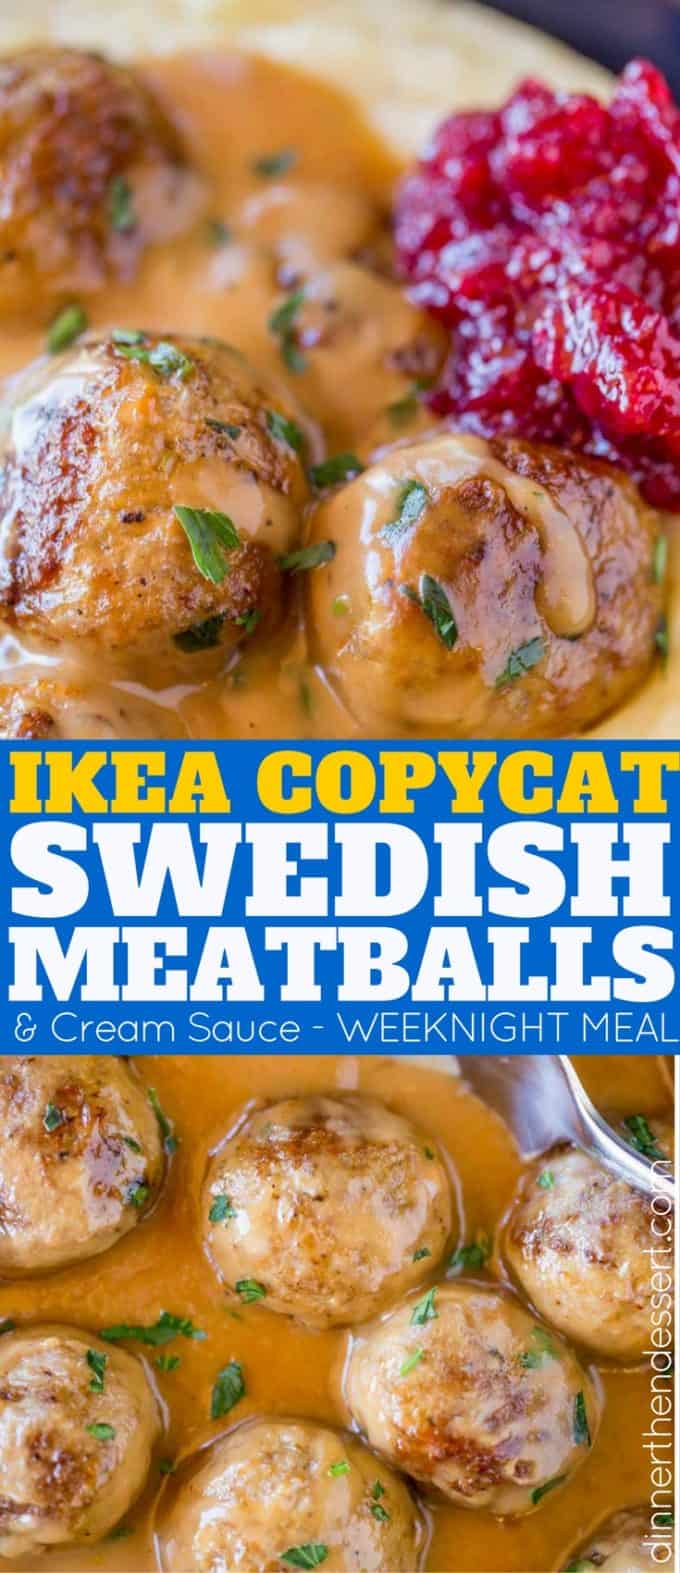 Swedish Meatballs like you'll find in Ikea, but without the trip to the store. Served with the creamy beef gravy, you'll LOVE this easy weeknight meal.